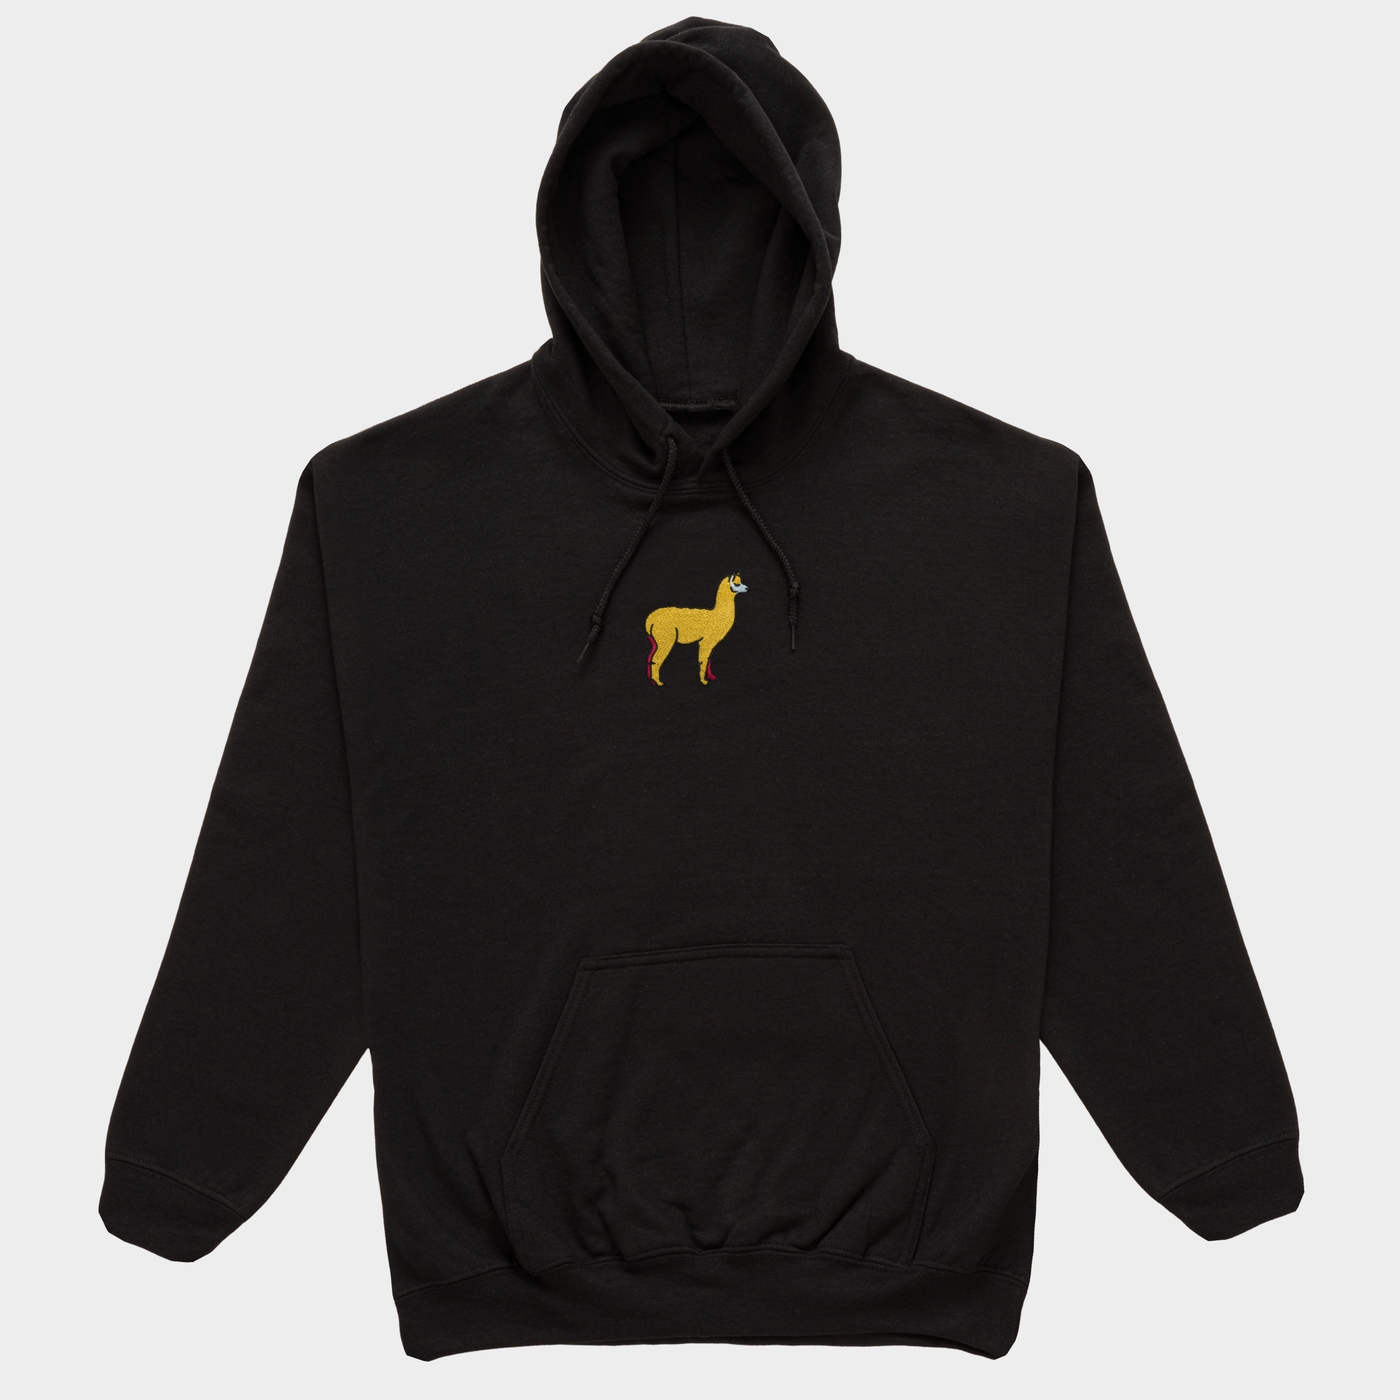 Bobby's Planet Men's Embroidered Alpaca Hoodie from South American Amazon Animals Collection in Black Color#color_black